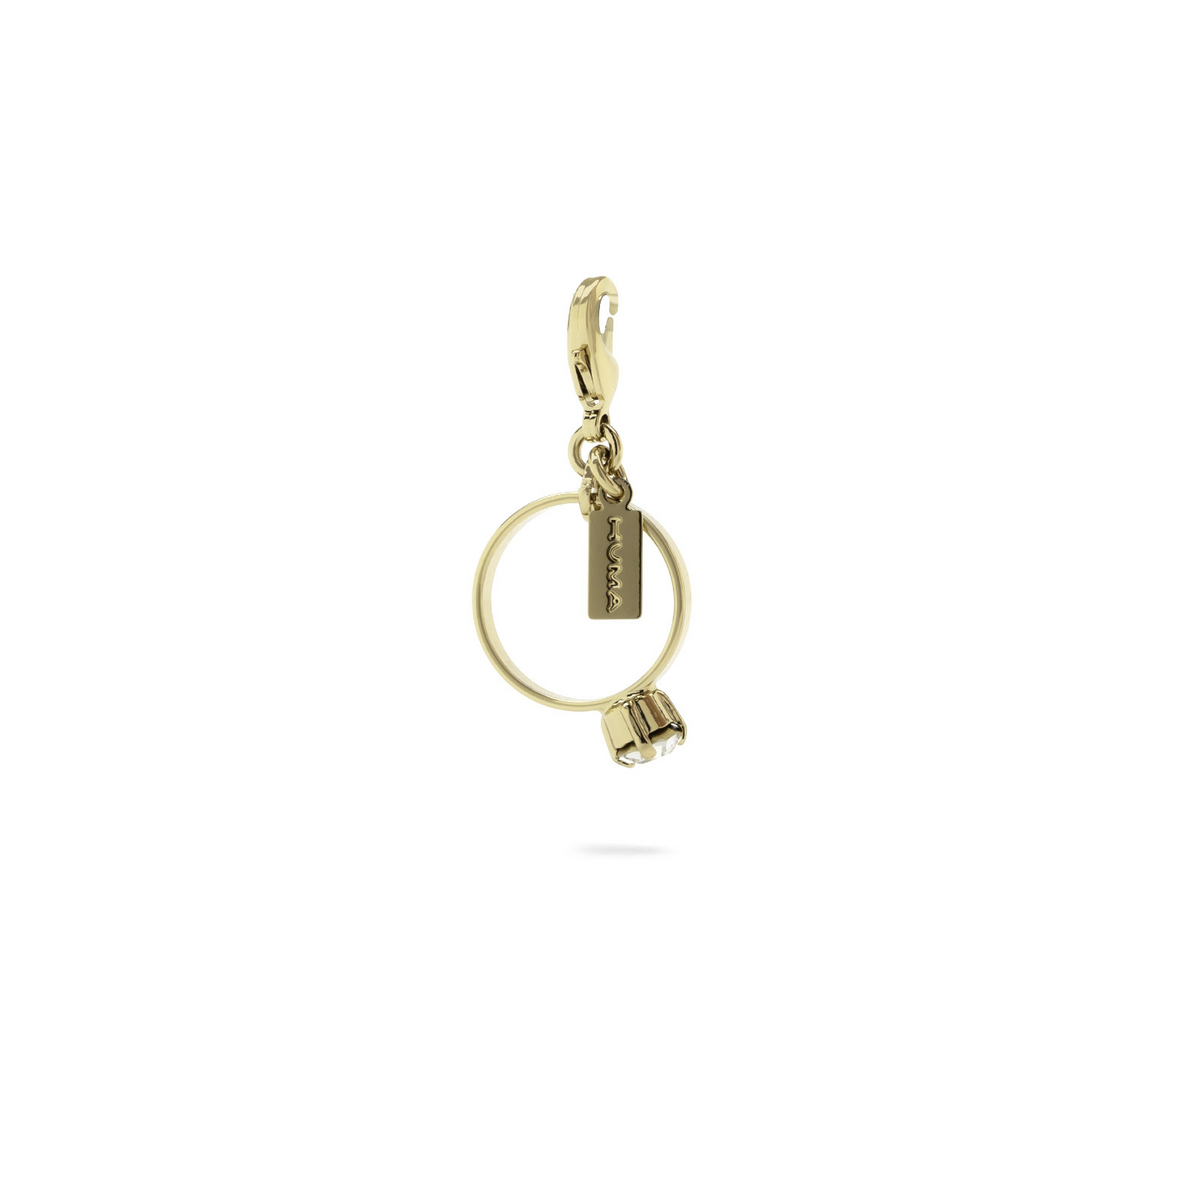 Huma EARRING WITH RING CRYSTAL STONE TL.31 Gold TL.31 Gold - anteprima prodotto 1/3